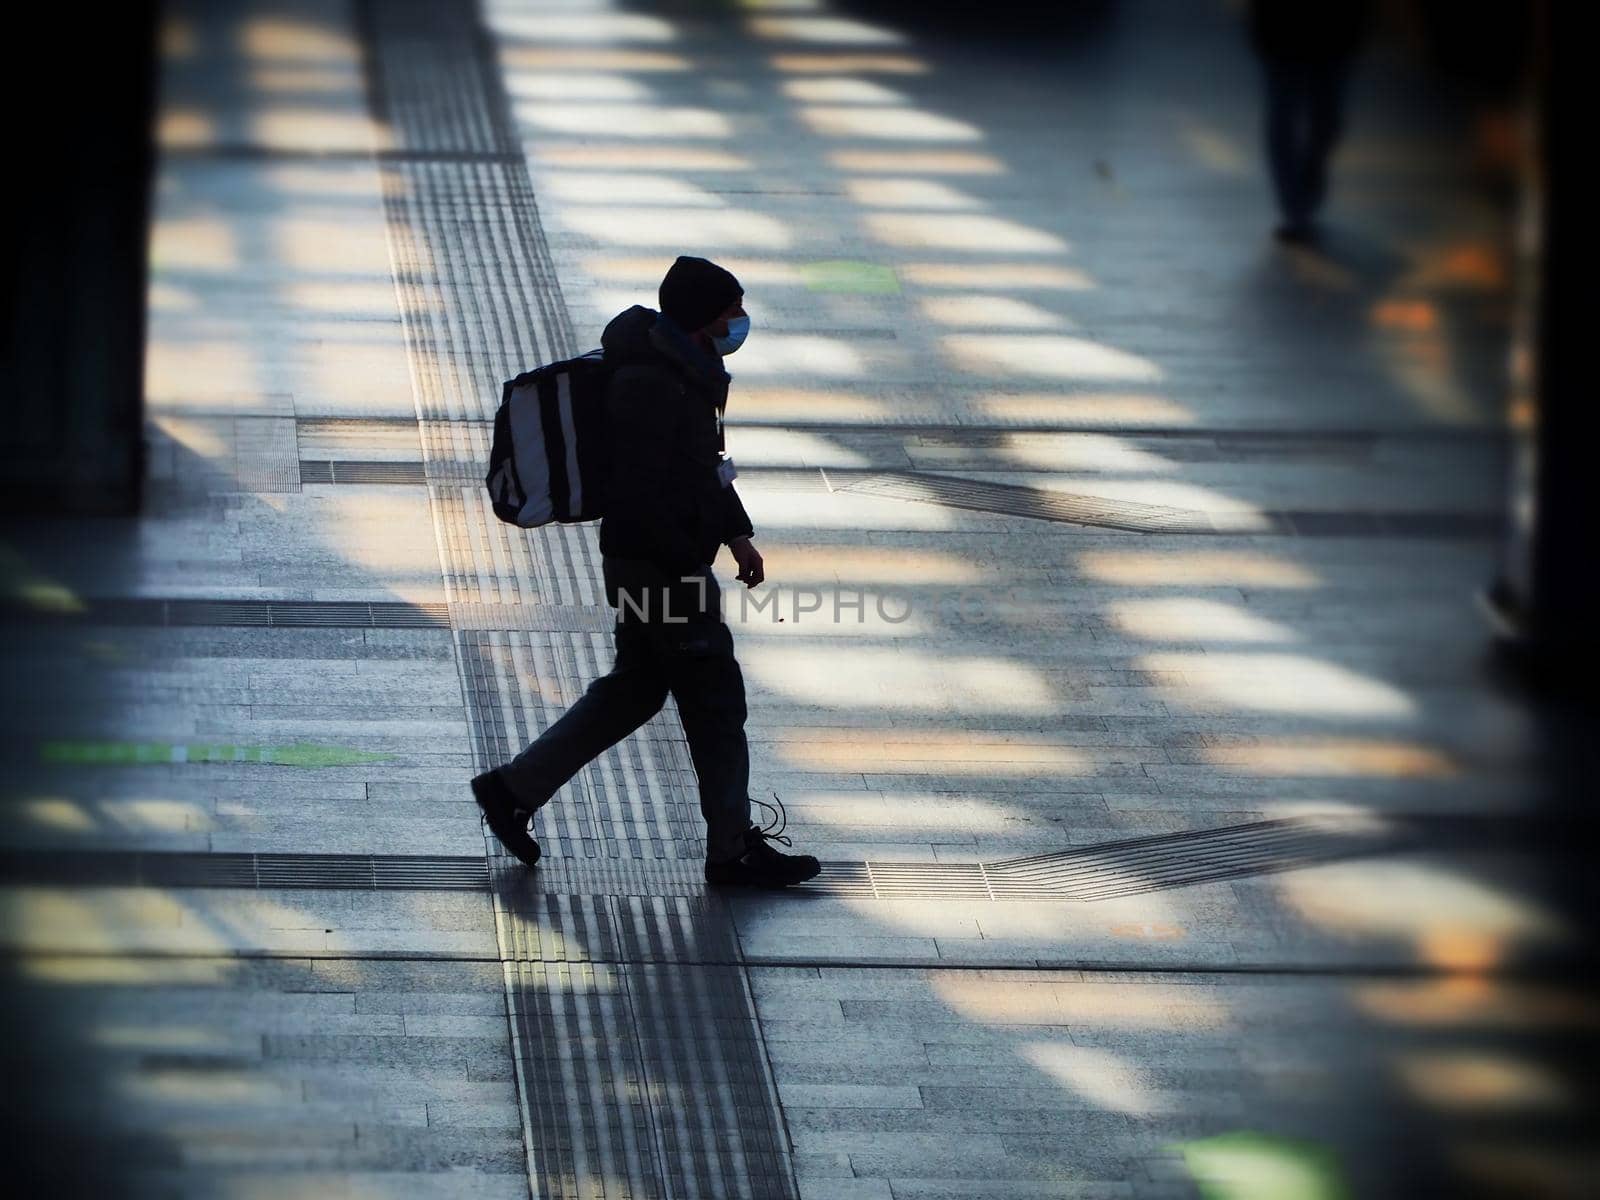 Unrecognizable lonely man silhouette walking wearing protective mask in train station Turin Italy January 13 2021 by lemar